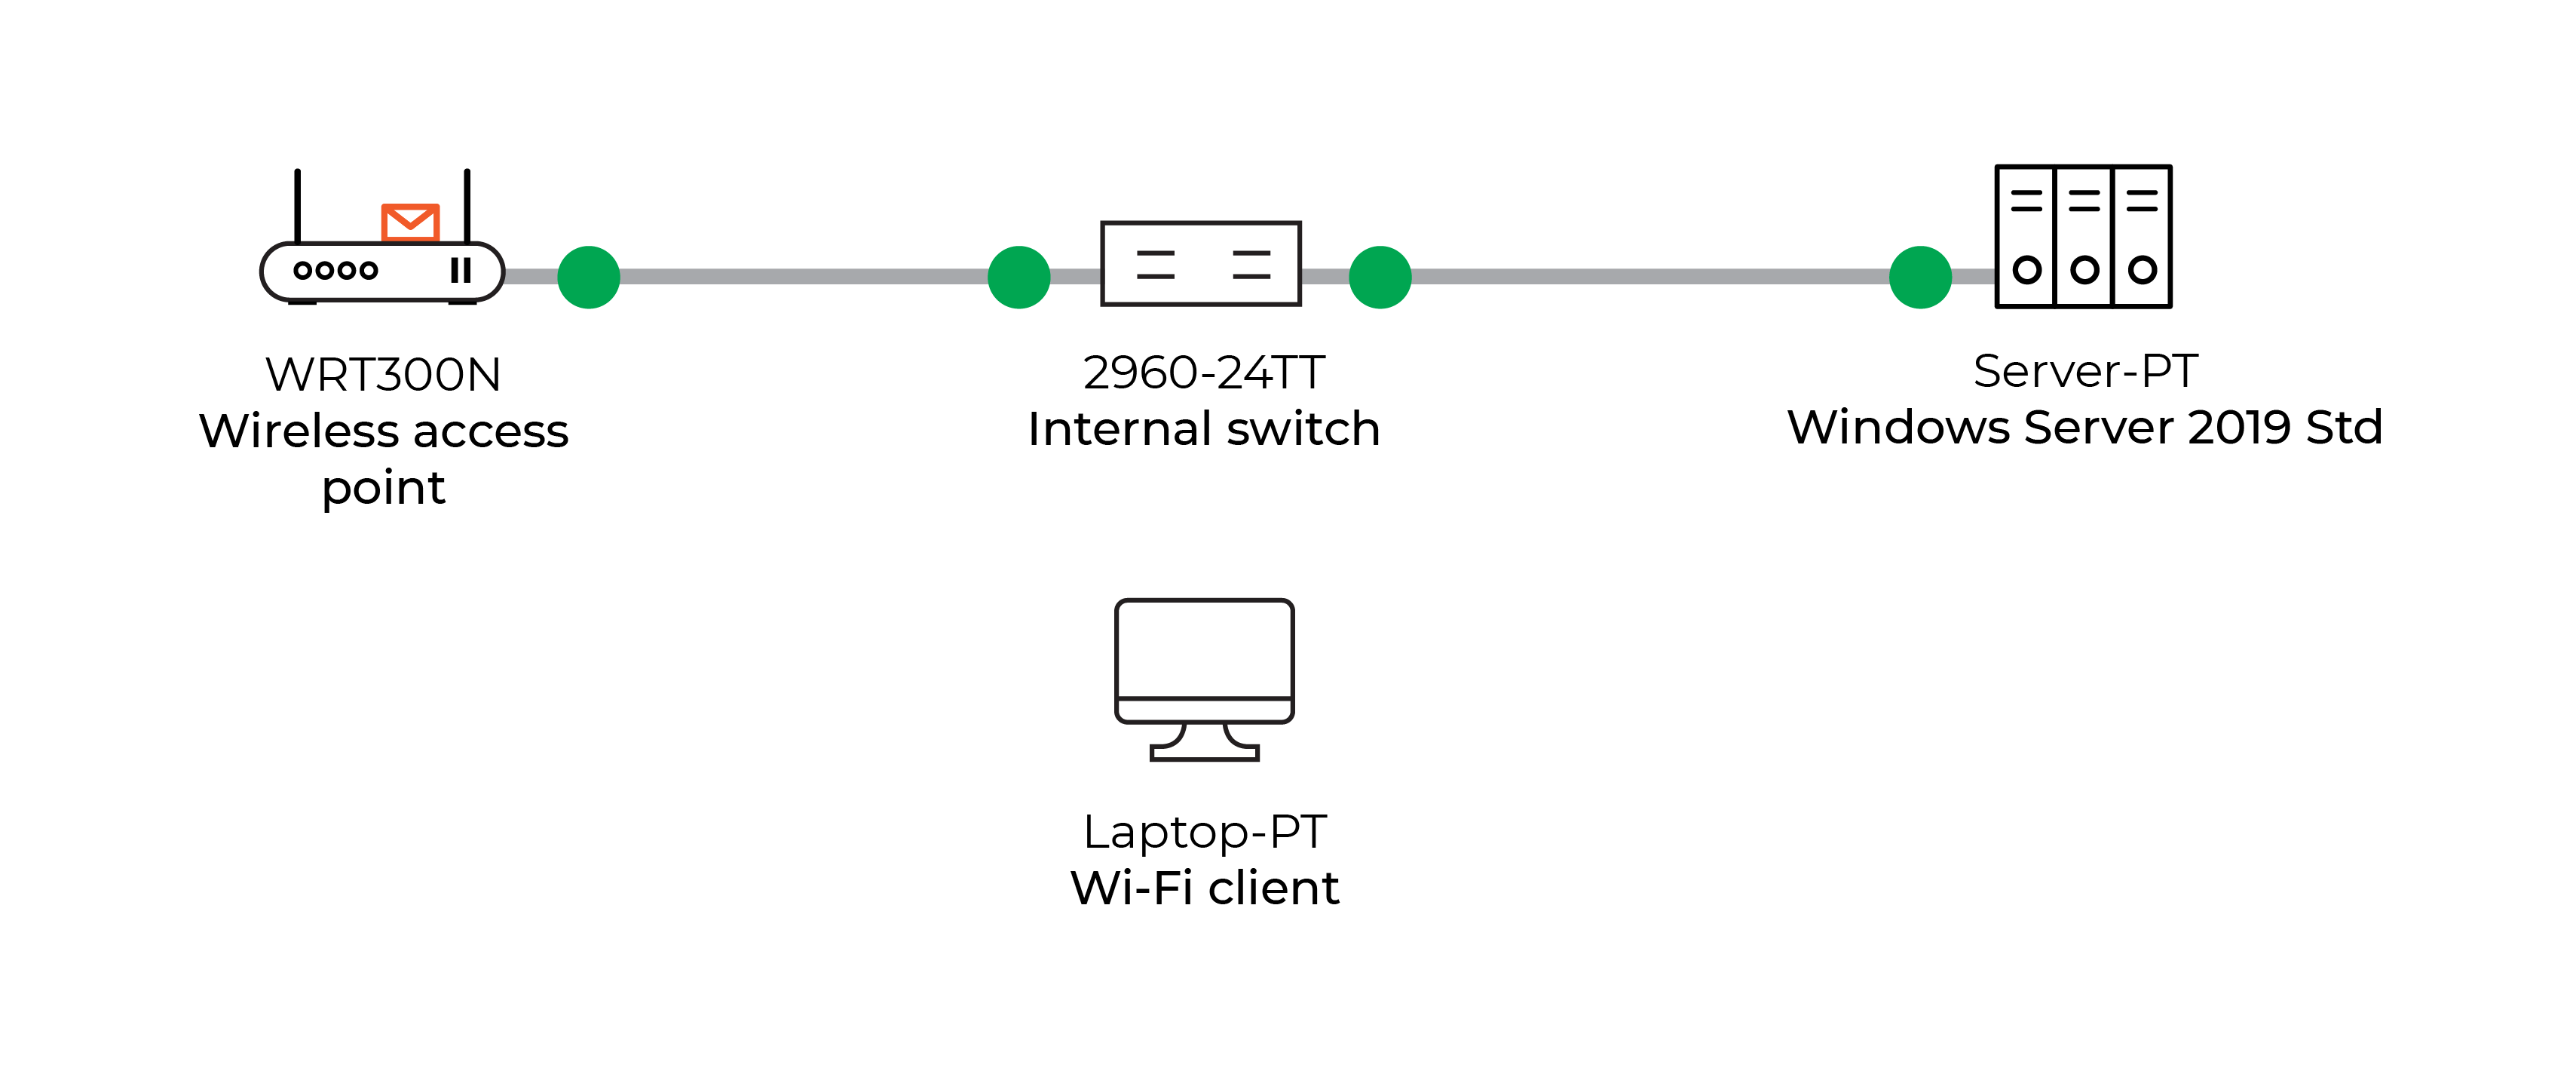 RADIUS exchanges preceding network access authorization for the Wi-Fi client